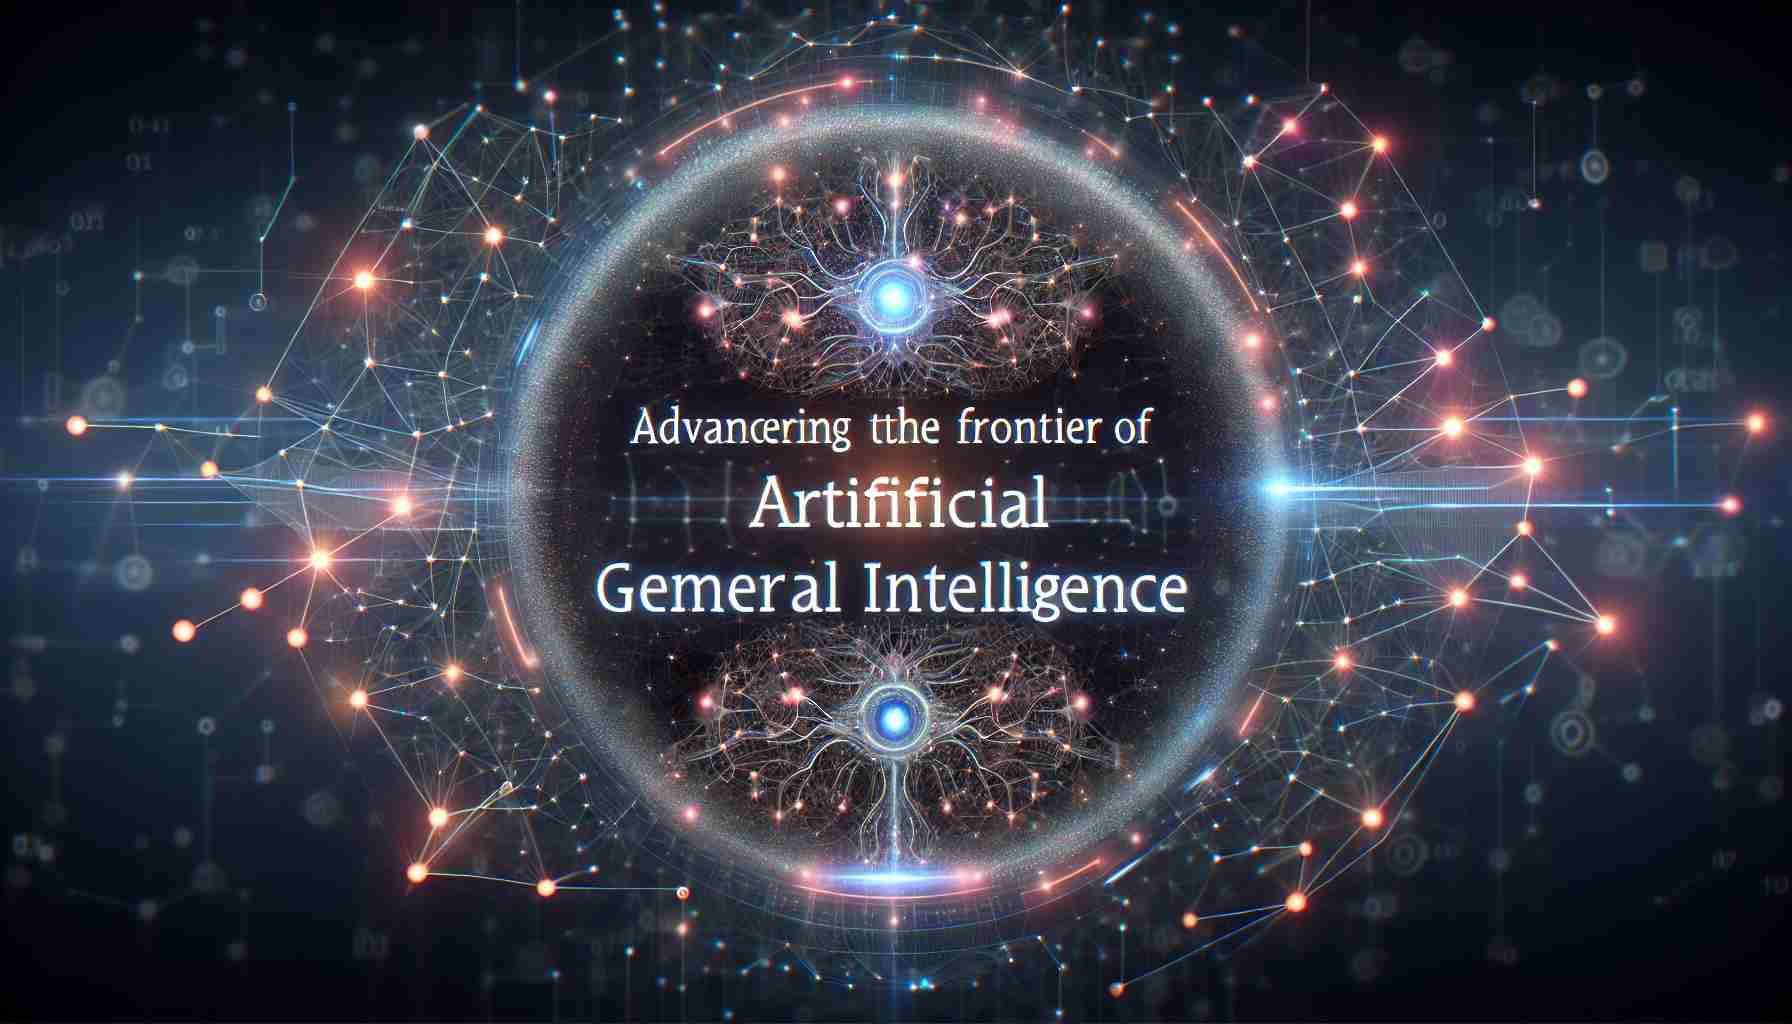 Google DeepMind: Advancing the Frontier of Artificial General Intelligence